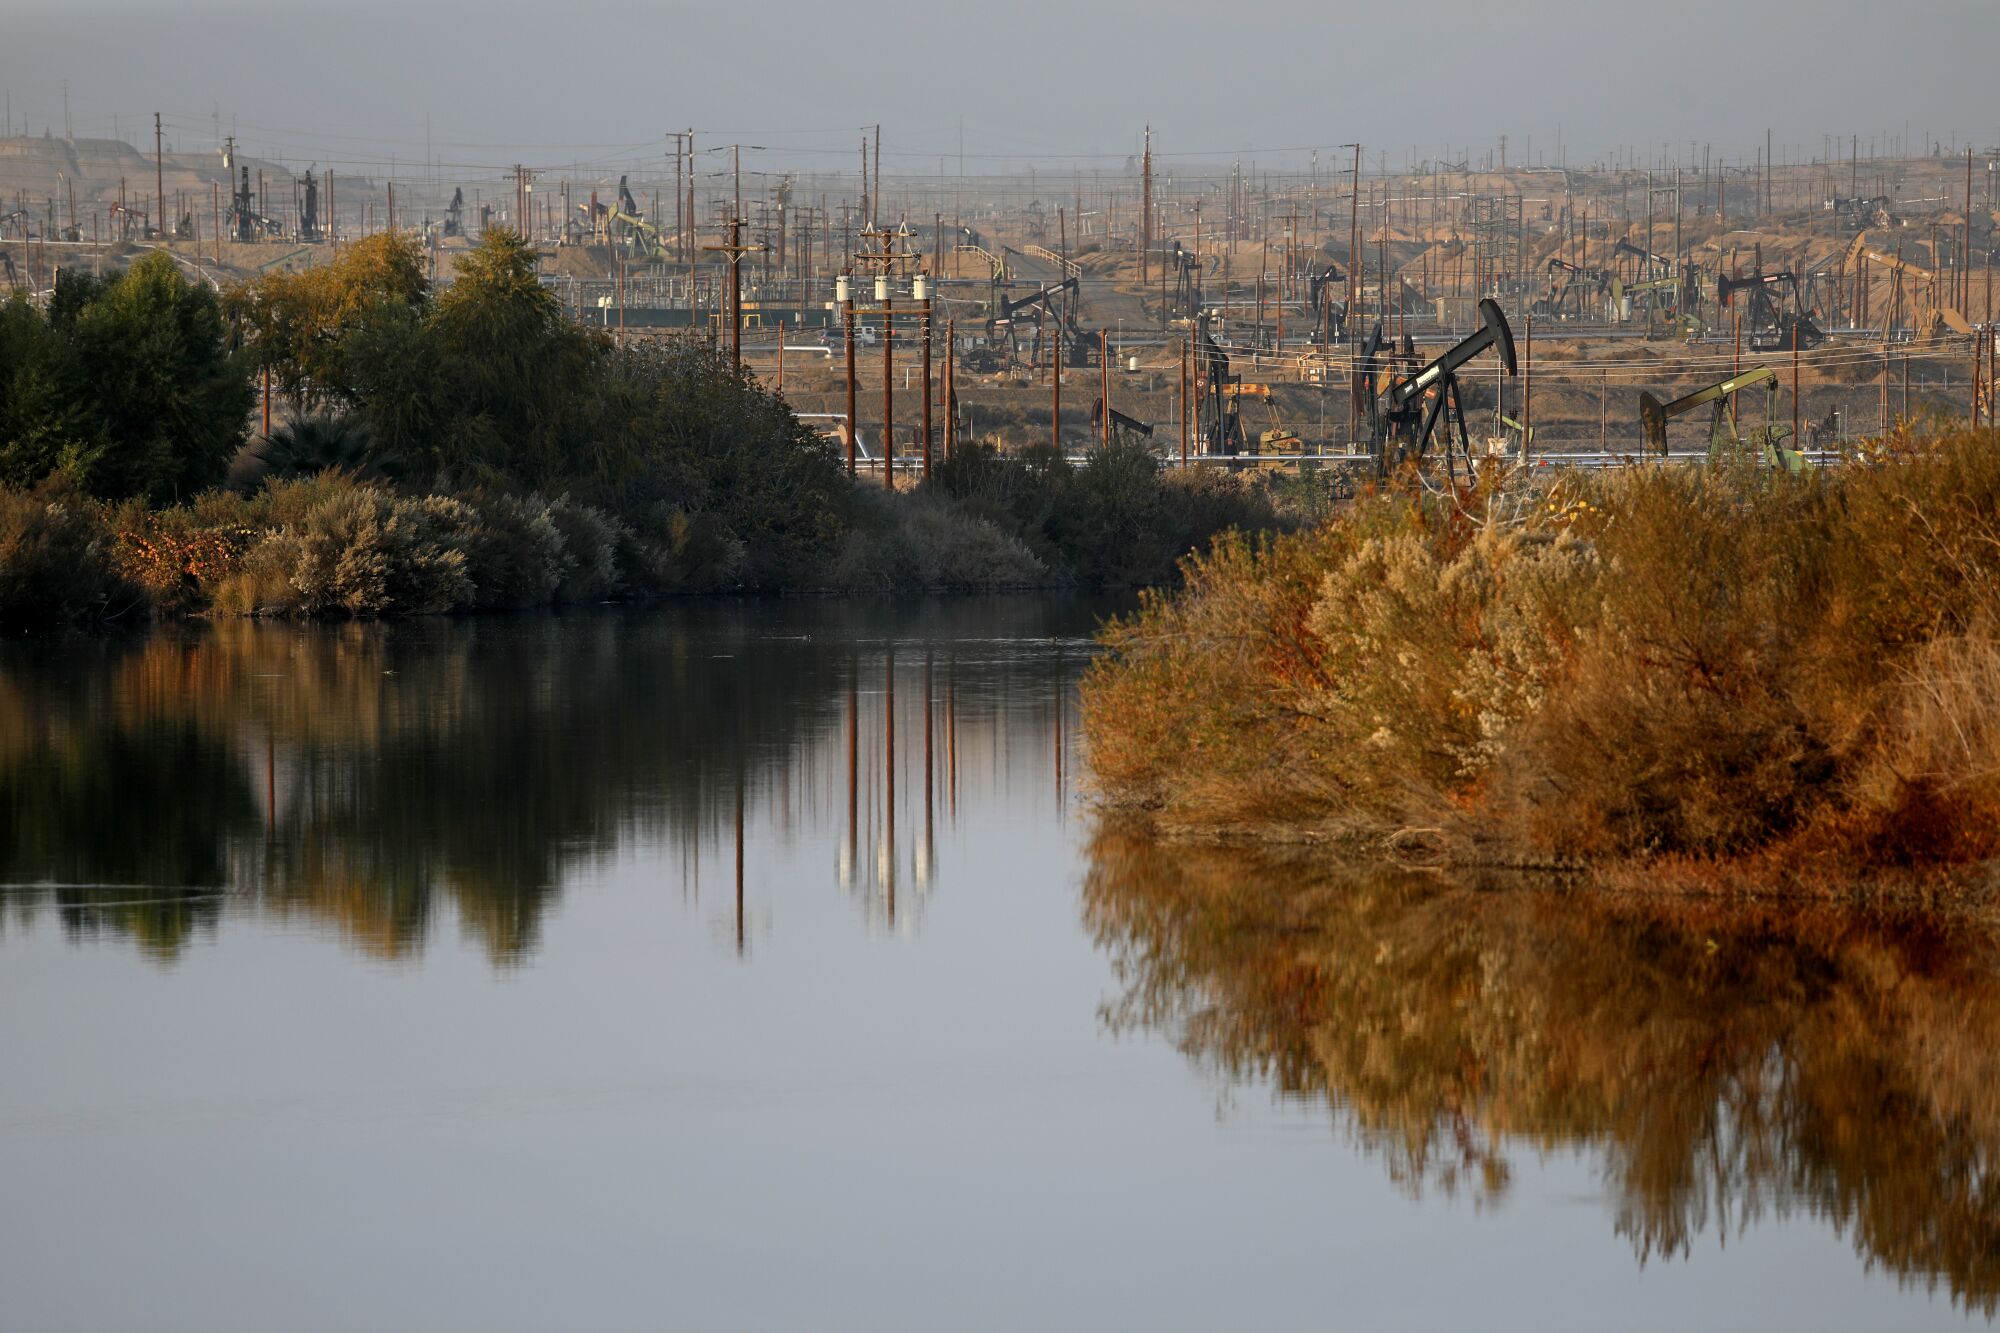 Pumpjacks in the Kern River Oil Field can be seen in the background from the Rocky Point weir